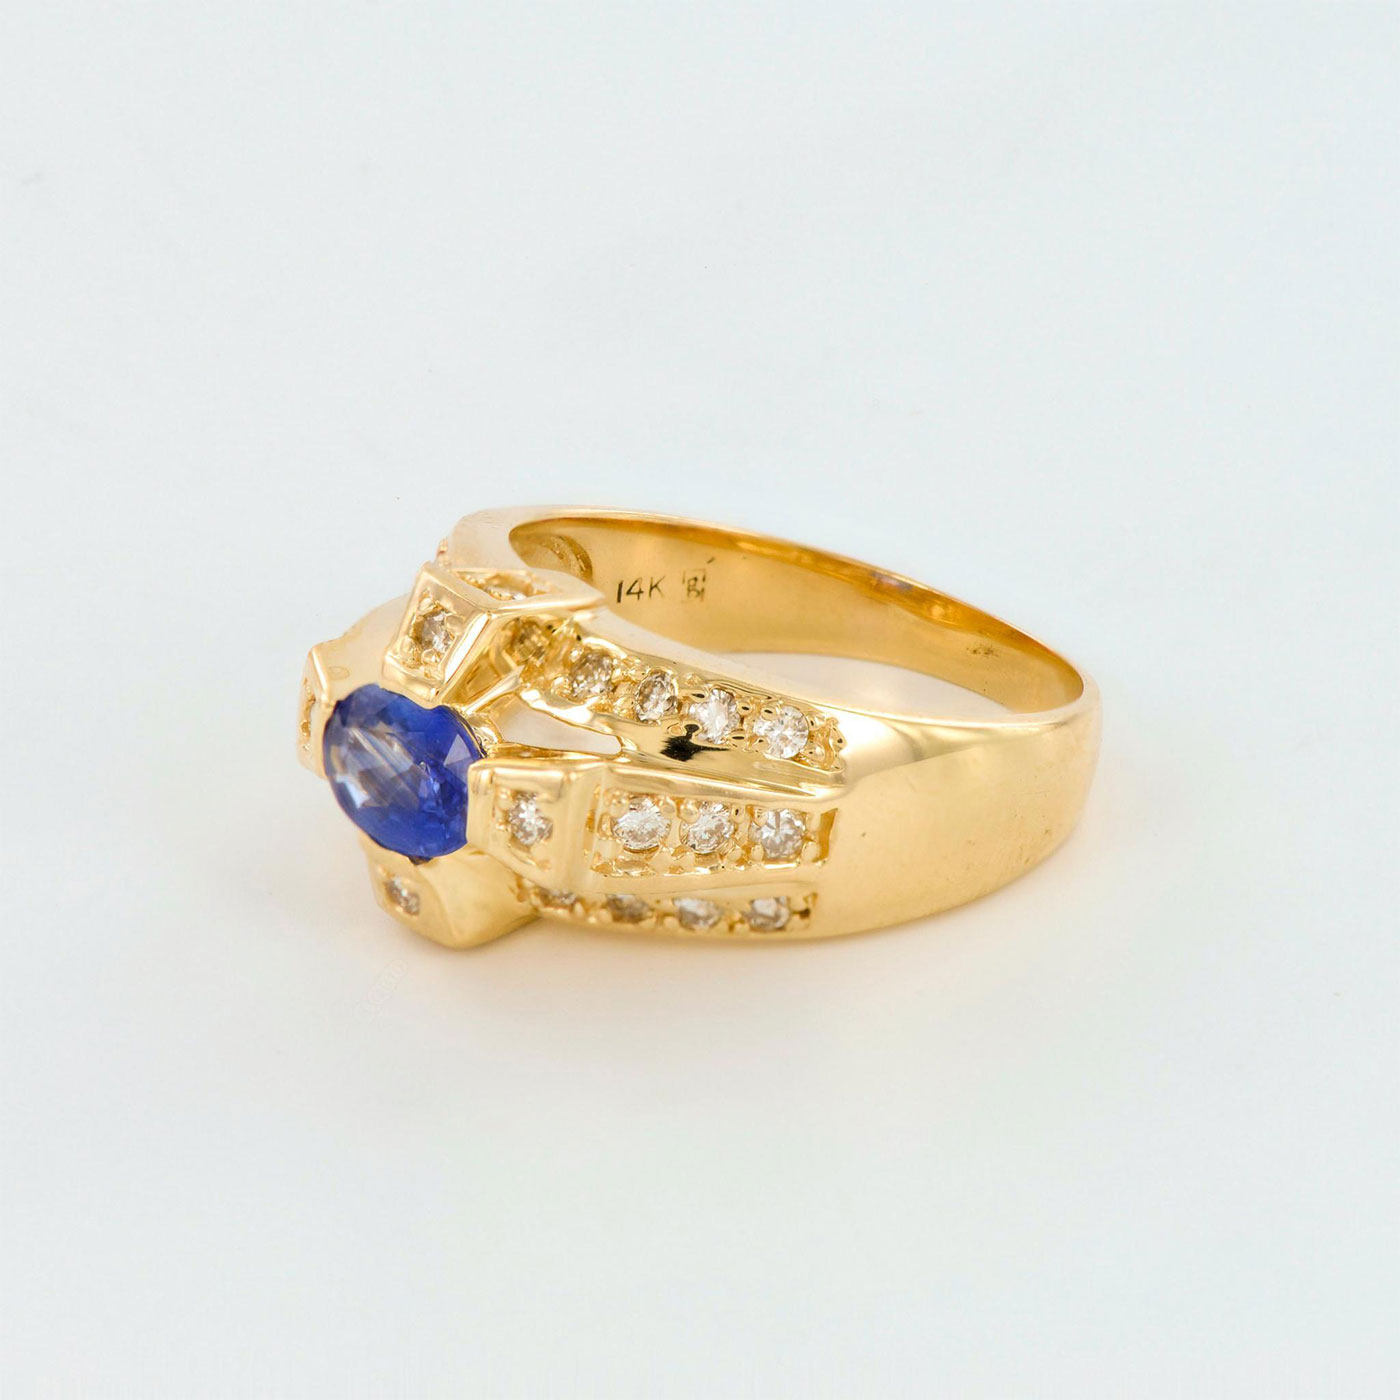 14K Yellow Gold Diamonds and Blue Sapphire Statement Ring - Image 3 of 5